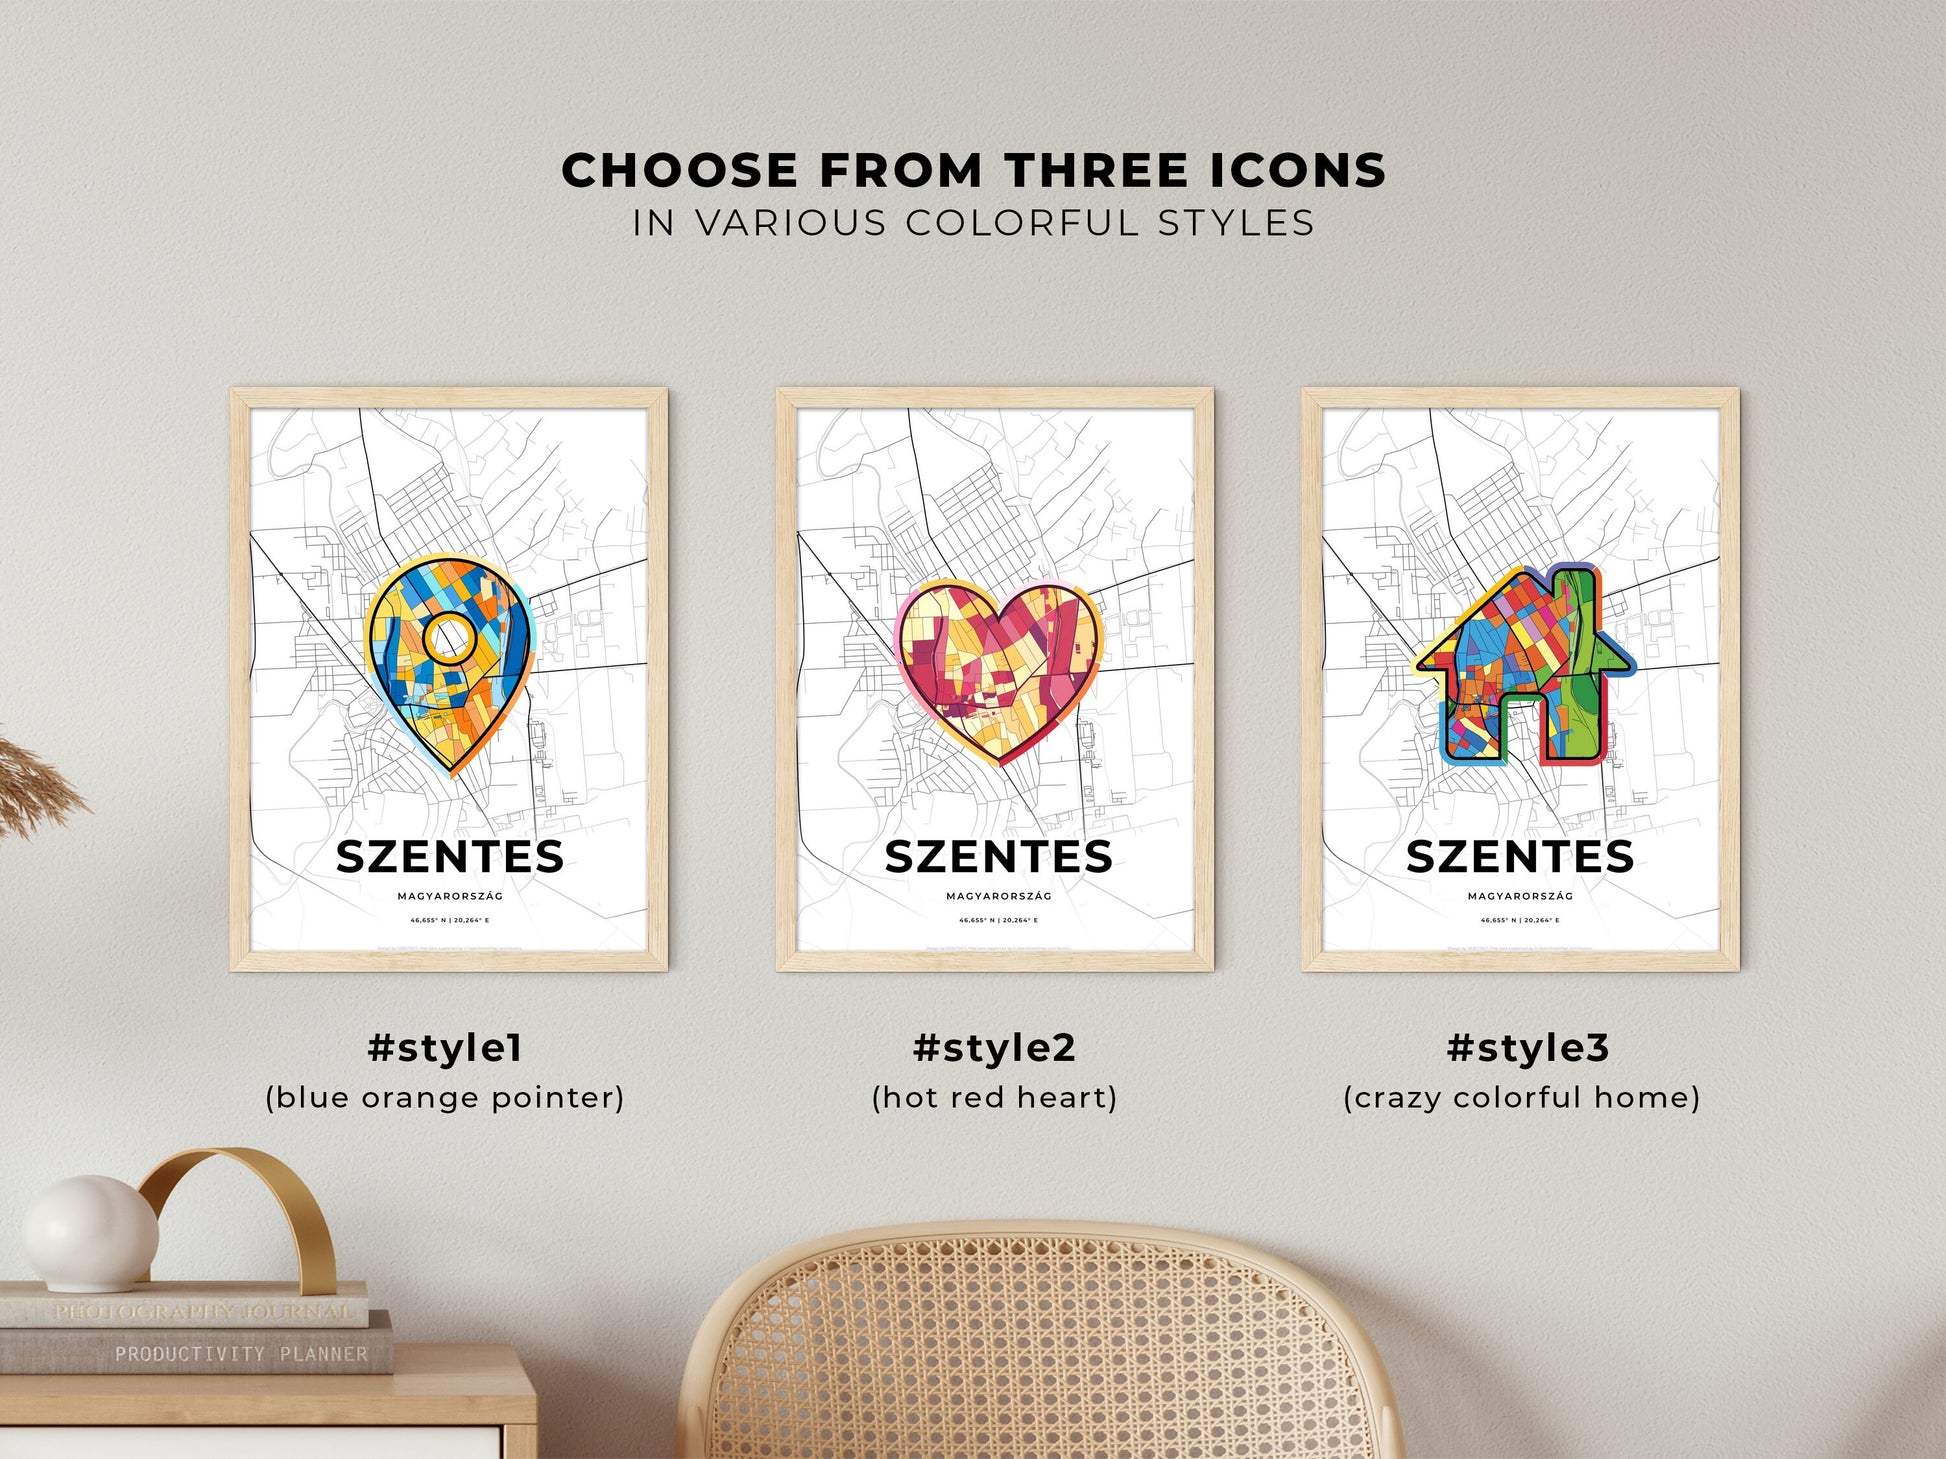 SZENTES HUNGARY minimal art map with a colorful icon. Where it all began, Couple map gift.